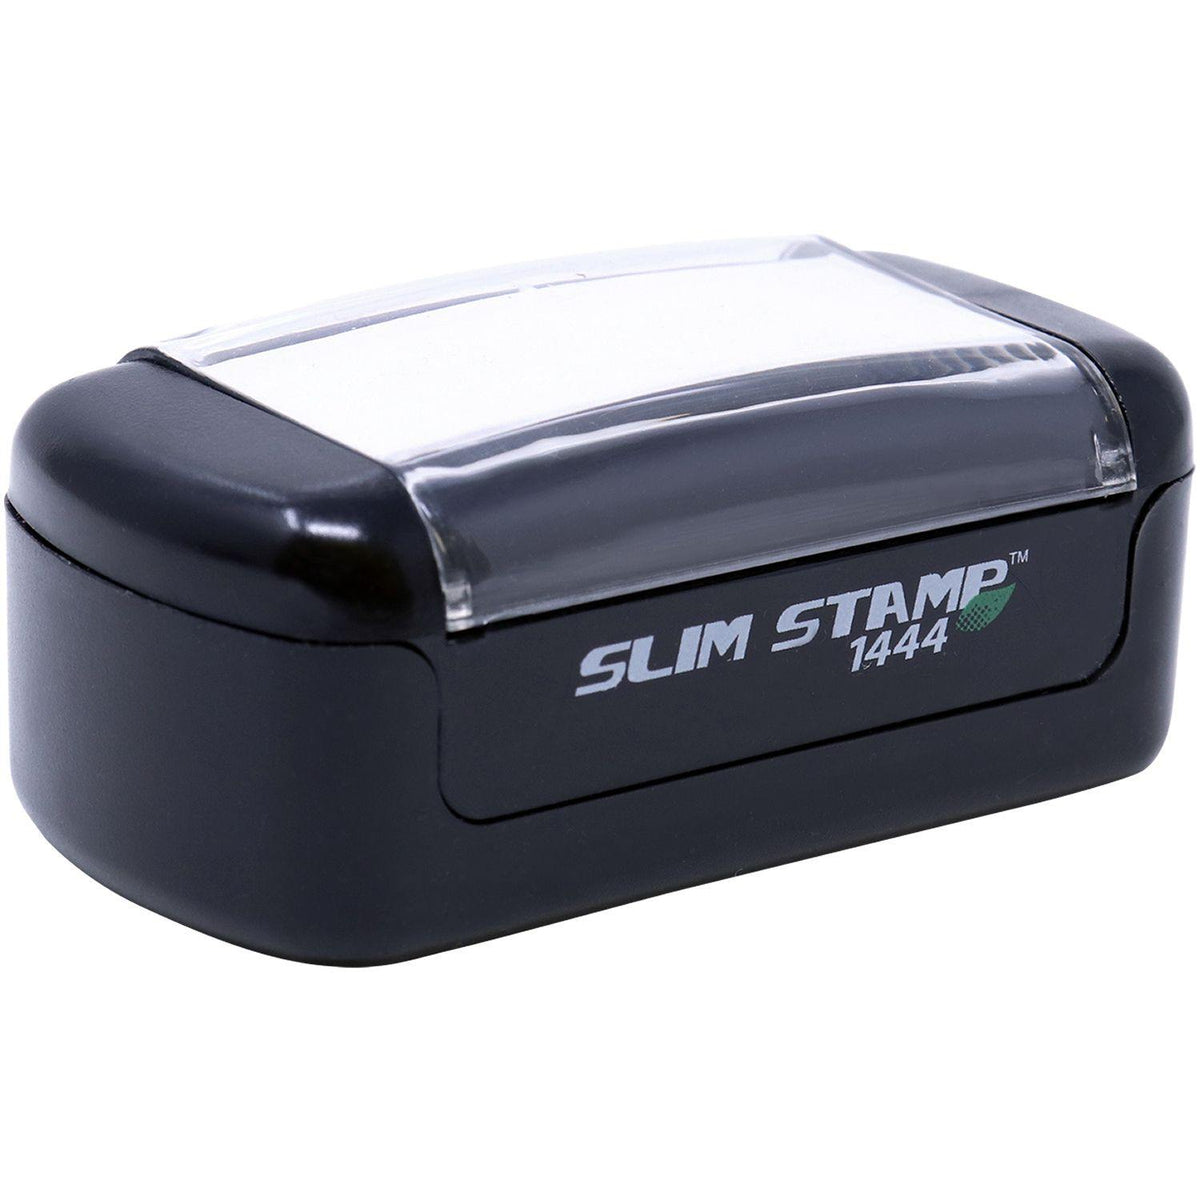 Alt View of Slim Pre Inked Unofficial Transcript Stamp Mount Angle